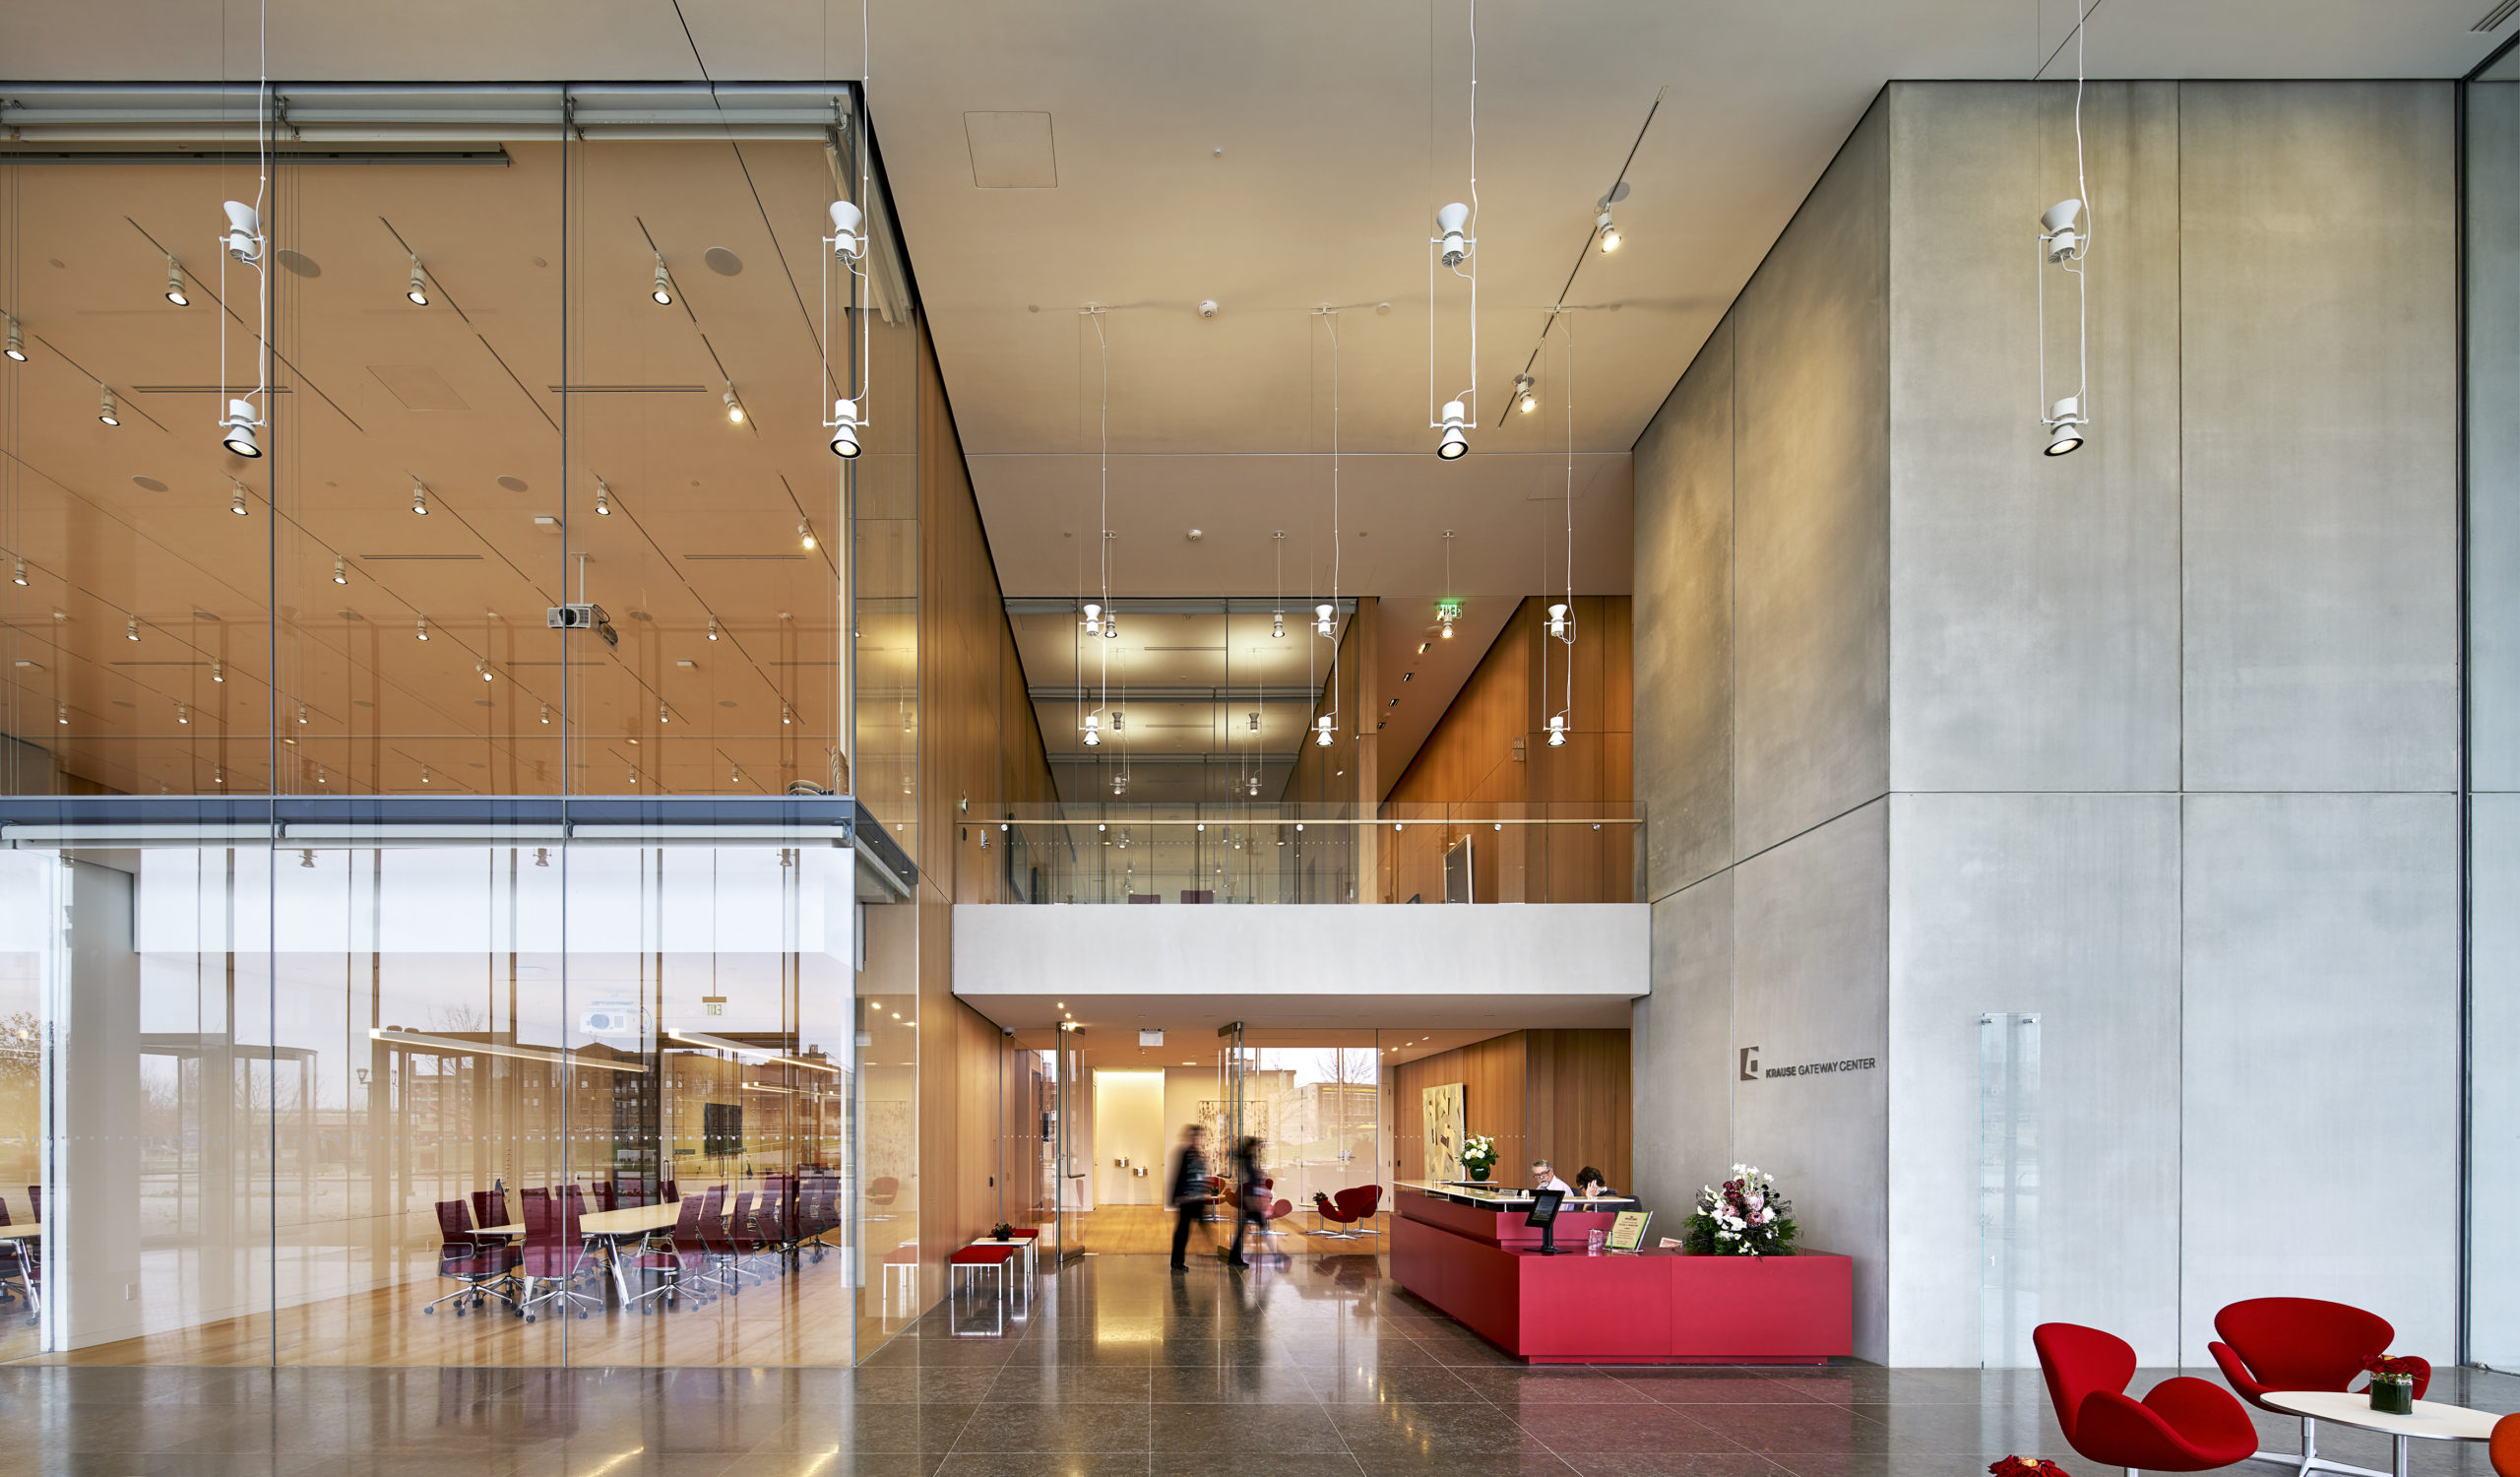 breathtaking workspaces  Krause Gateway Center by OPN Architects, Des Moines, IA